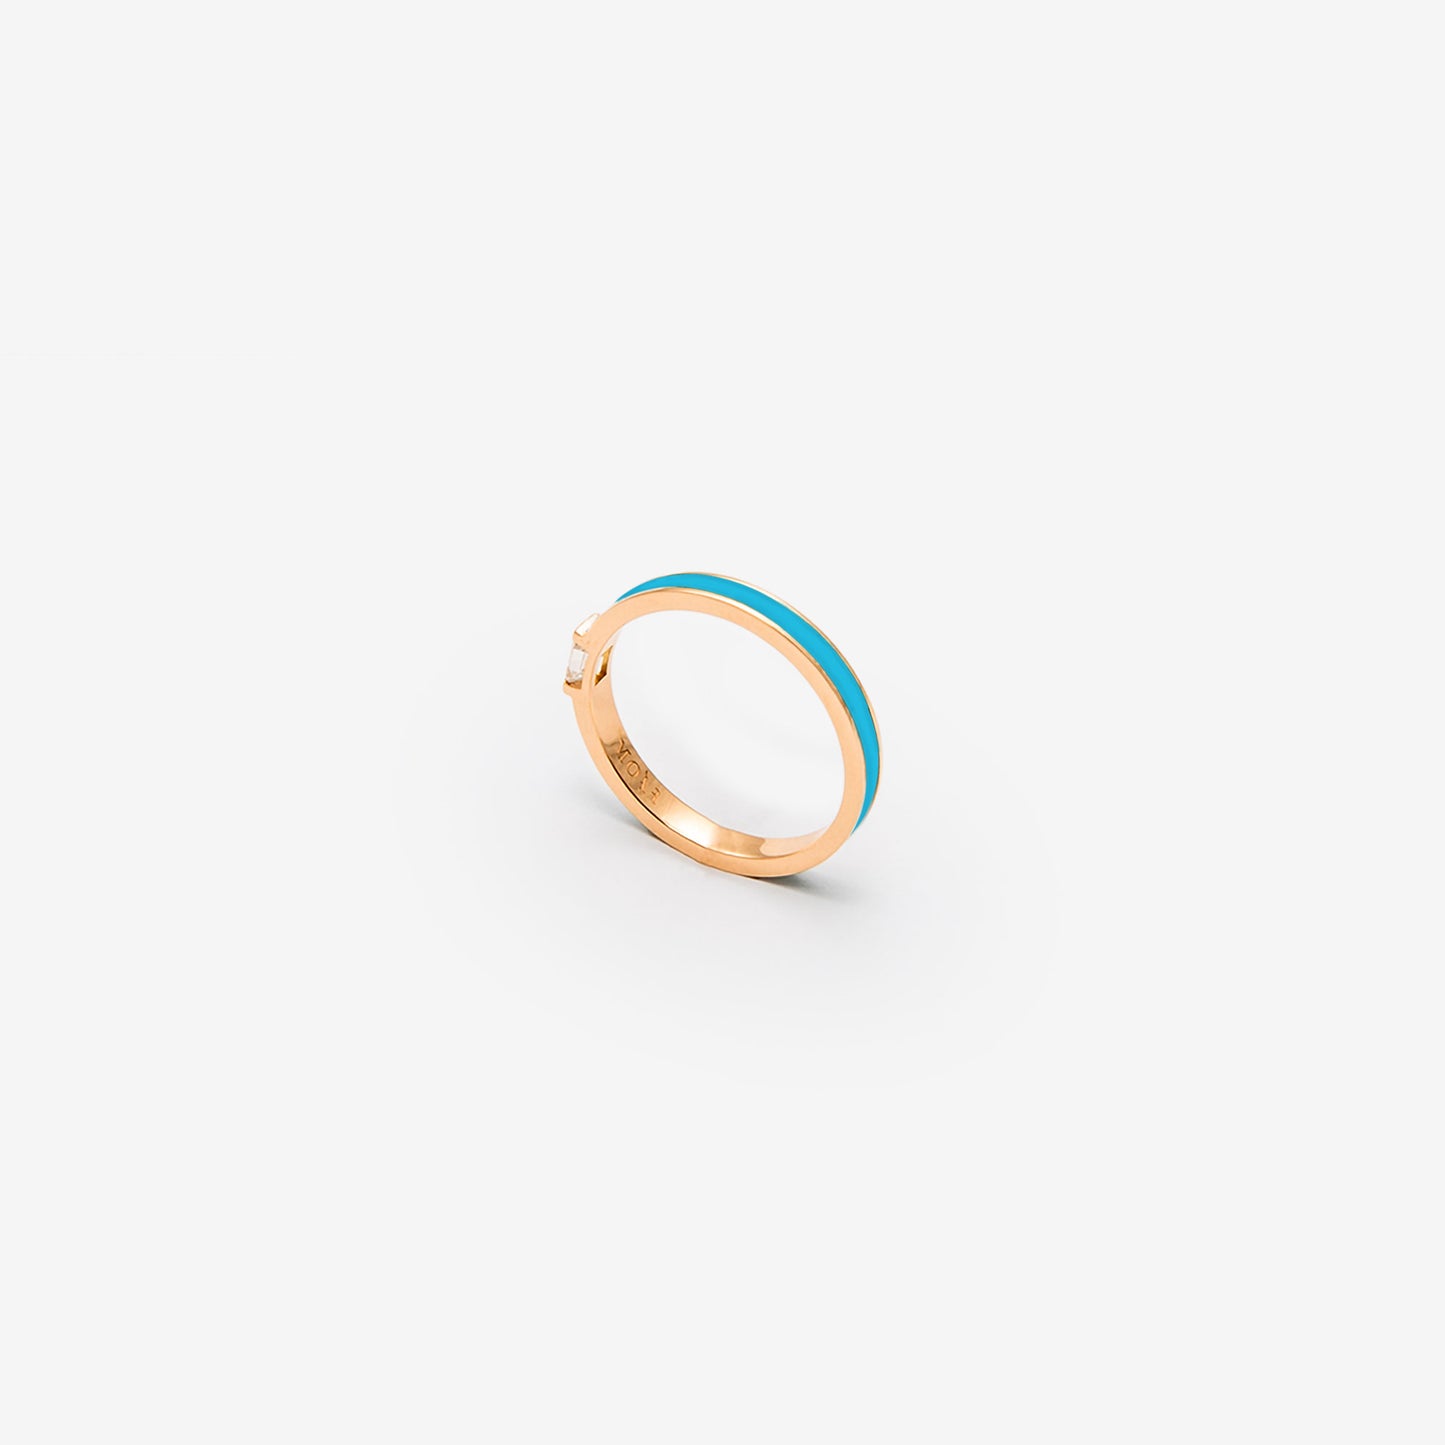 Rose gold band with light blue enamel and a diamond